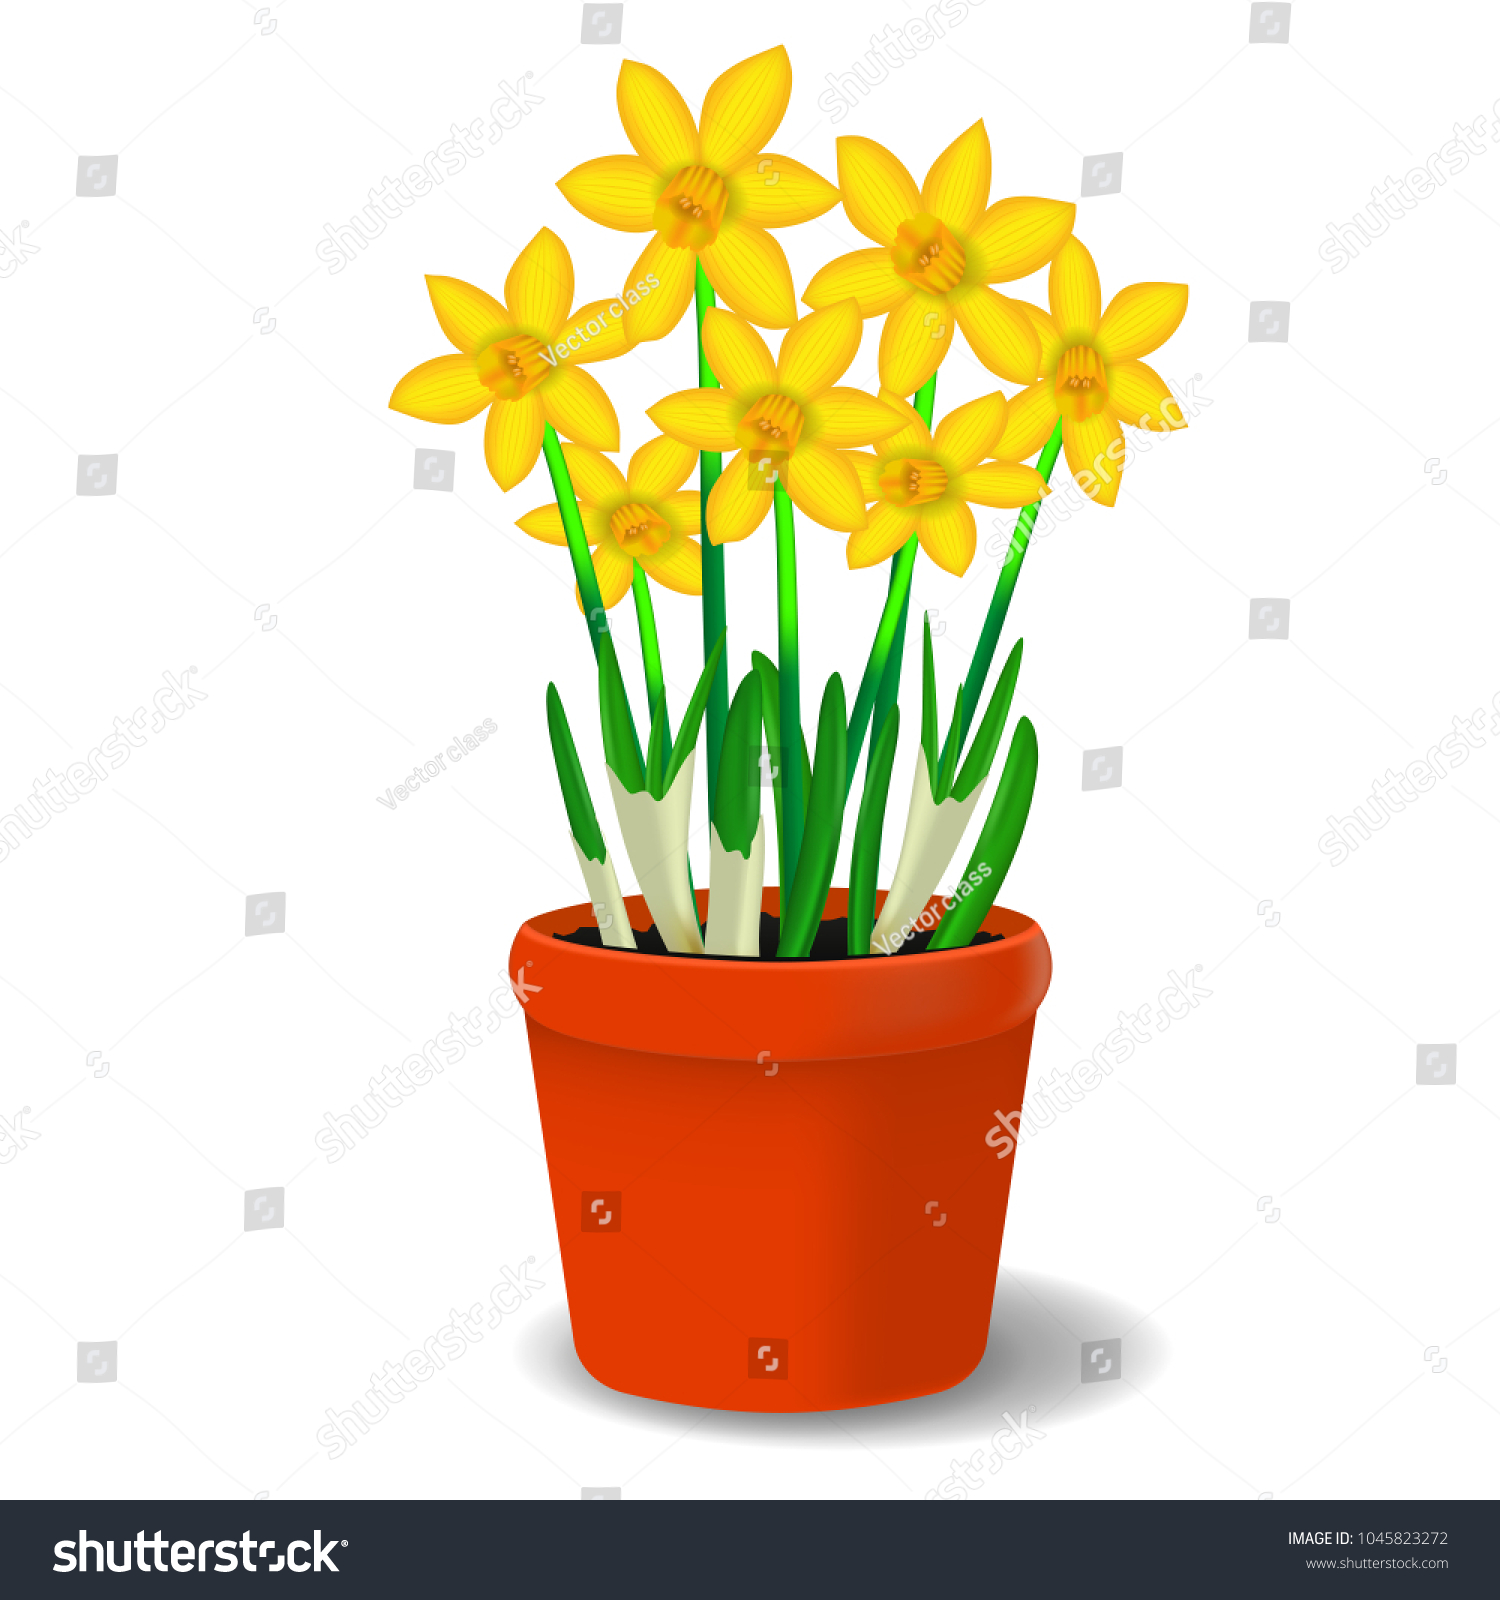 Vector Image Yellow Flowers Daffodil Pot Stock Photo (Photo, Vector ...